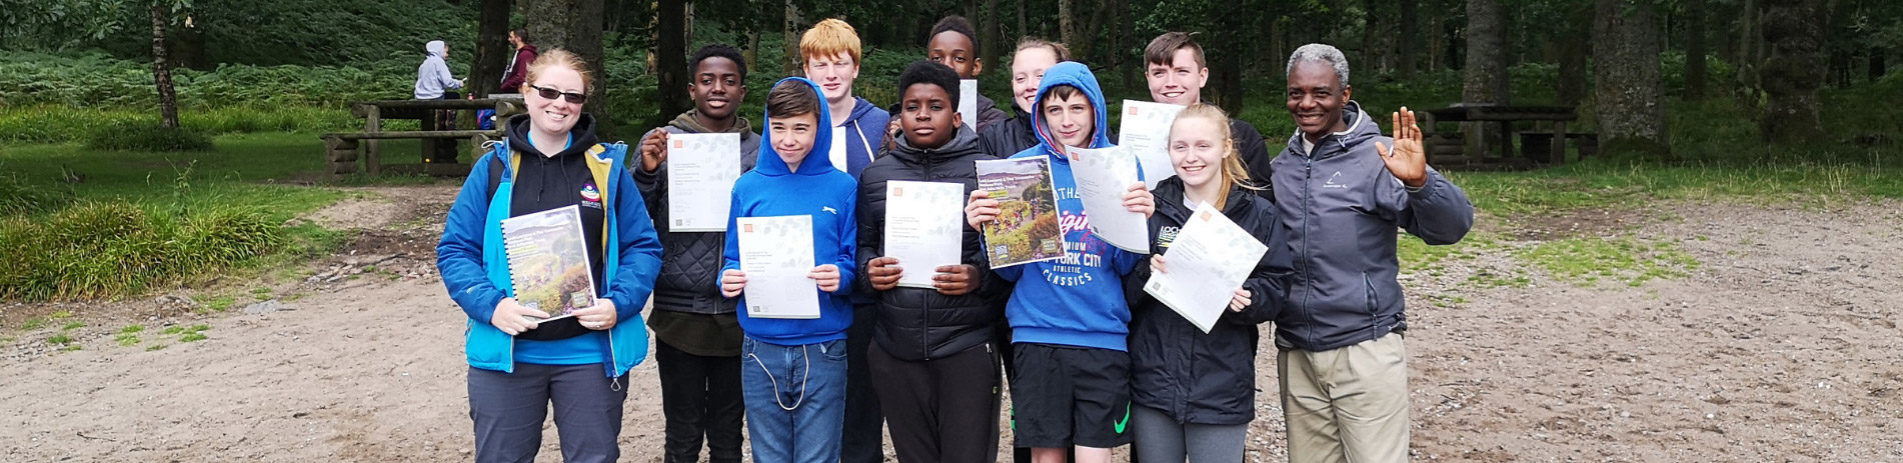 group-of-young-male-and-female-students-and-teacher-on-right-all-proudly-holding-up-certificates-standing-on-port-bawn-beach-on-inchcailloch-beach-with-forest-and-picnic-benches-behind